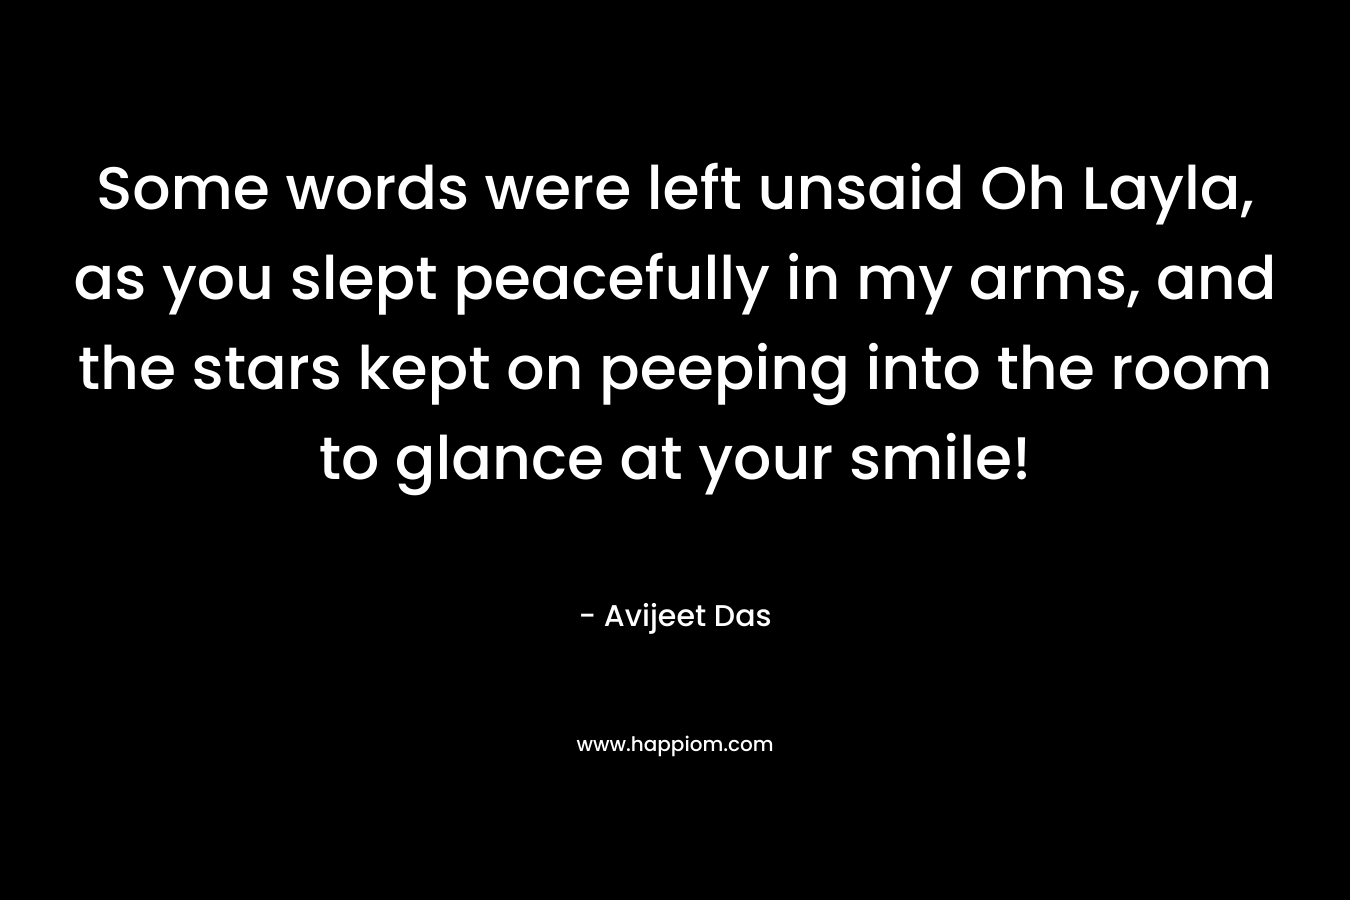 Some words were left unsaid Oh Layla, as you slept peacefully in my arms, and the stars kept on peeping into the room to glance at your smile! – Avijeet Das